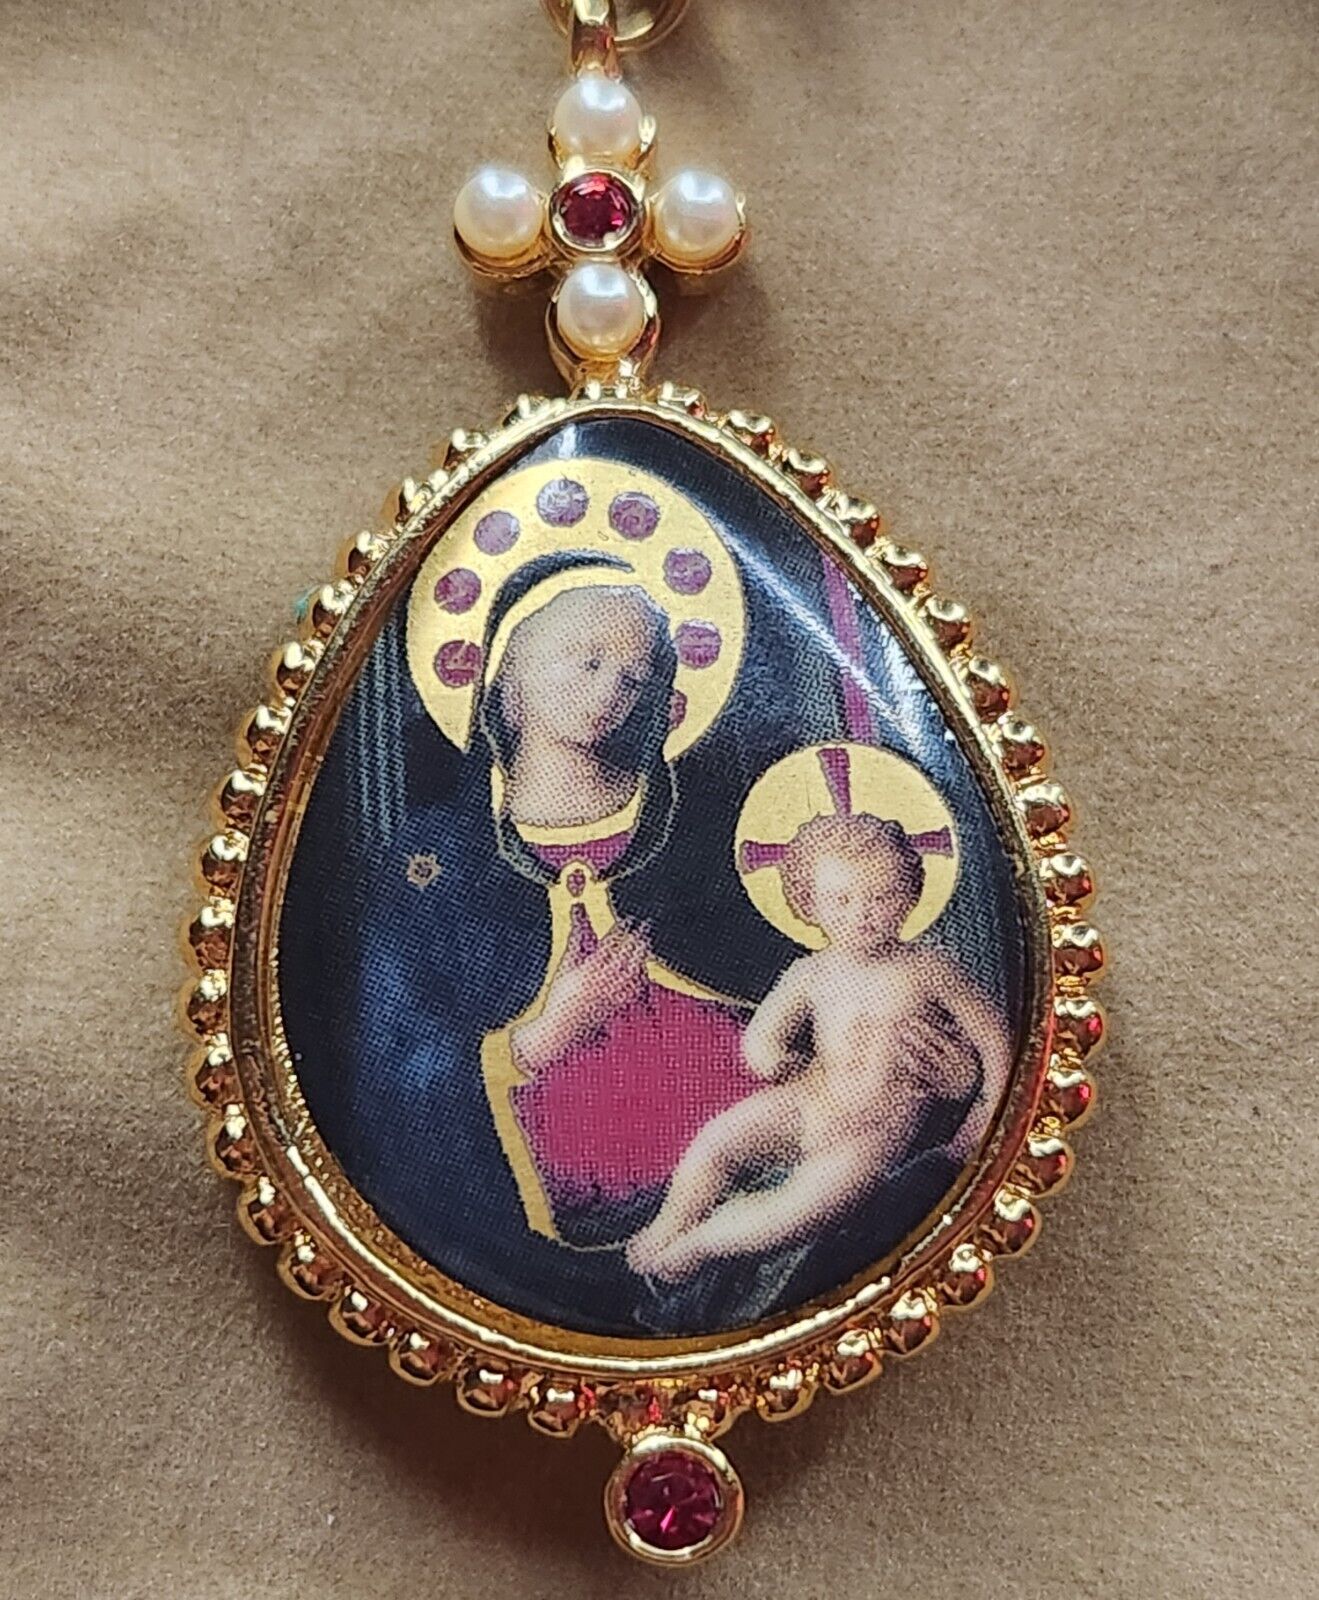 Necklace Our Lady Madonna and Child Jesus Picture Charm, Gold Tone, With Chain